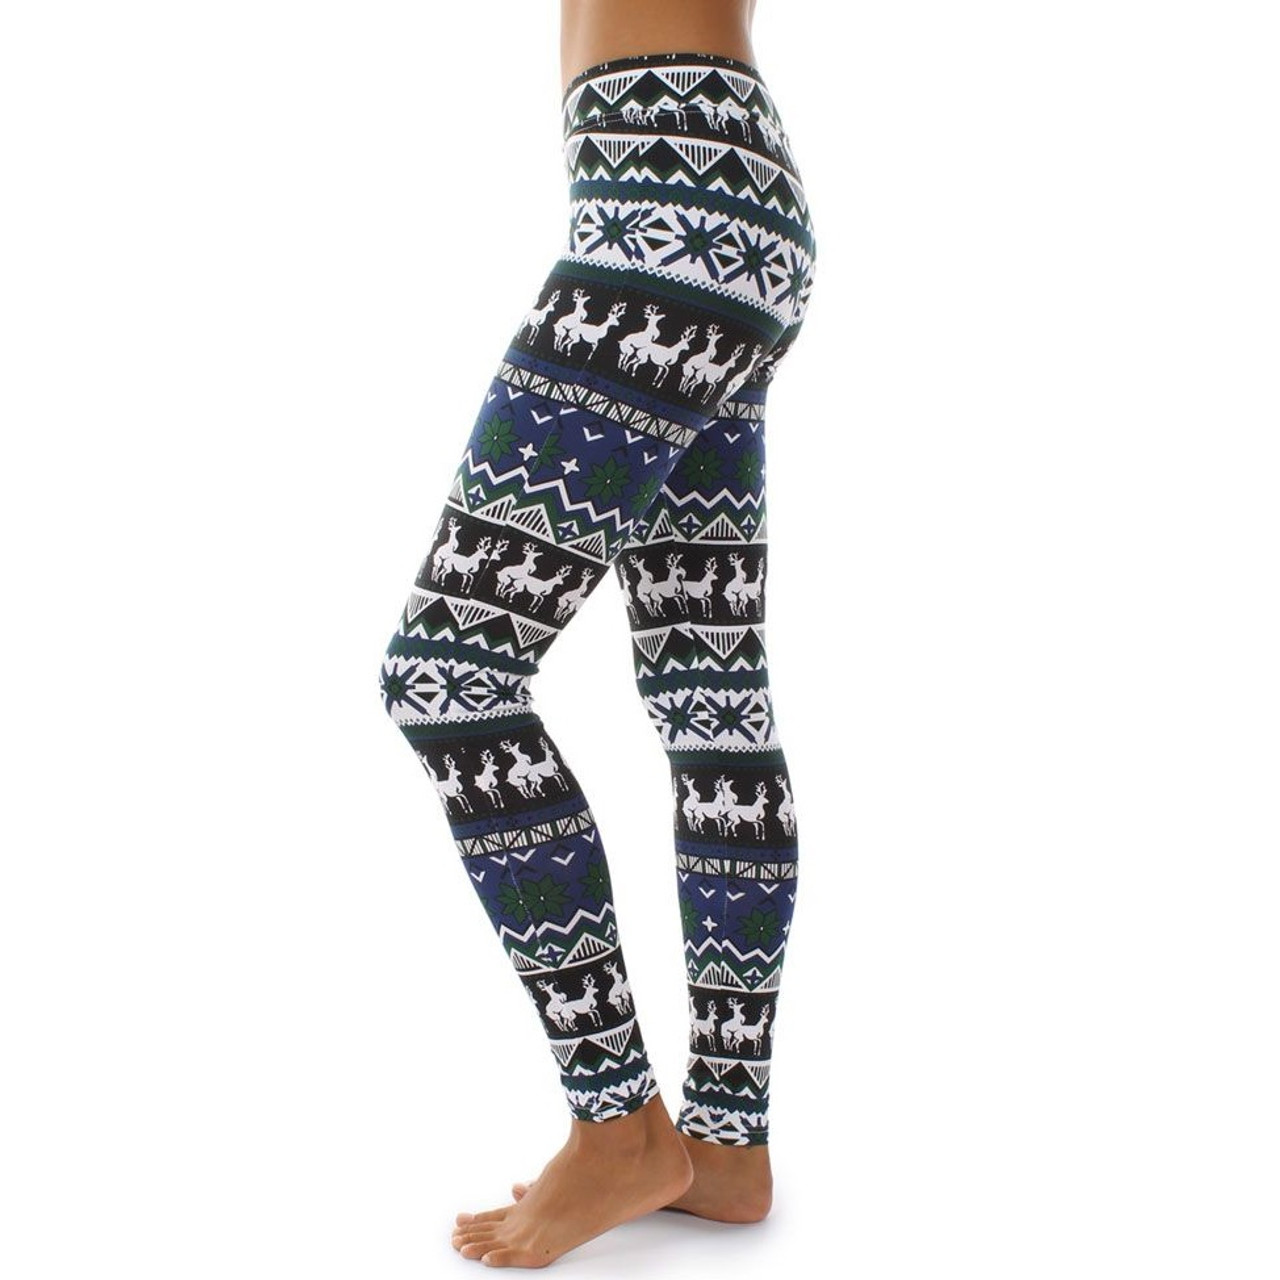 https://cdn11.bigcommerce.com/s-c9a80/images/stencil/1280x1280/products/5865/16457/Humping_reindeer_leggings_side__1_1__98428.1667419312.Jpg?c=2